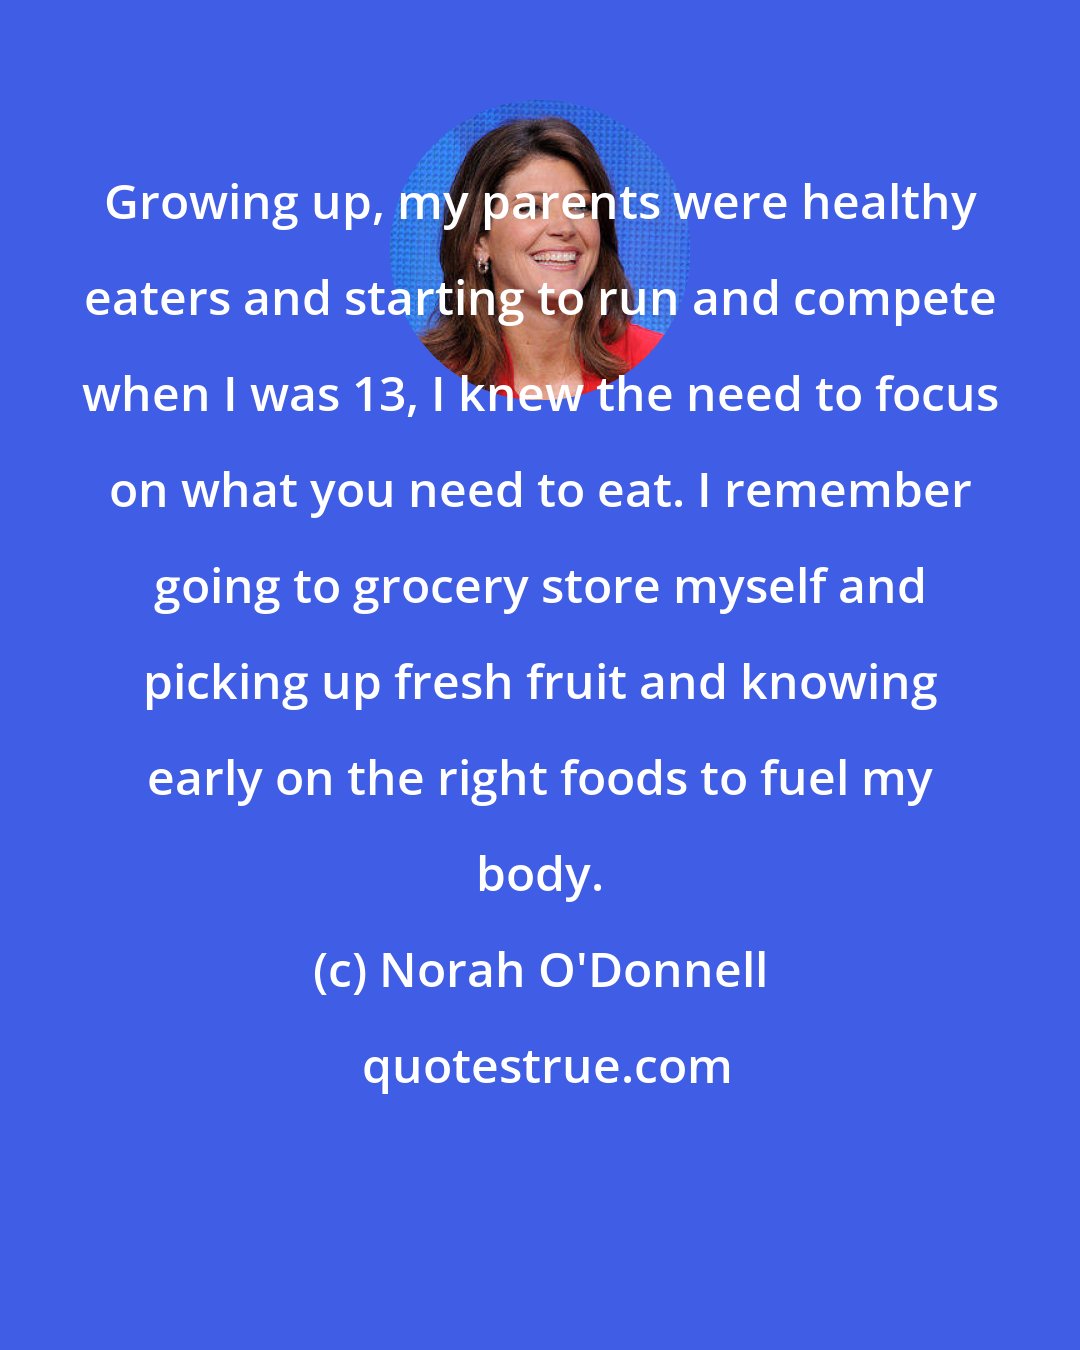 Norah O'Donnell: Growing up, my parents were healthy eaters and starting to run and compete when I was 13, I knew the need to focus on what you need to eat. I remember going to grocery store myself and picking up fresh fruit and knowing early on the right foods to fuel my body.